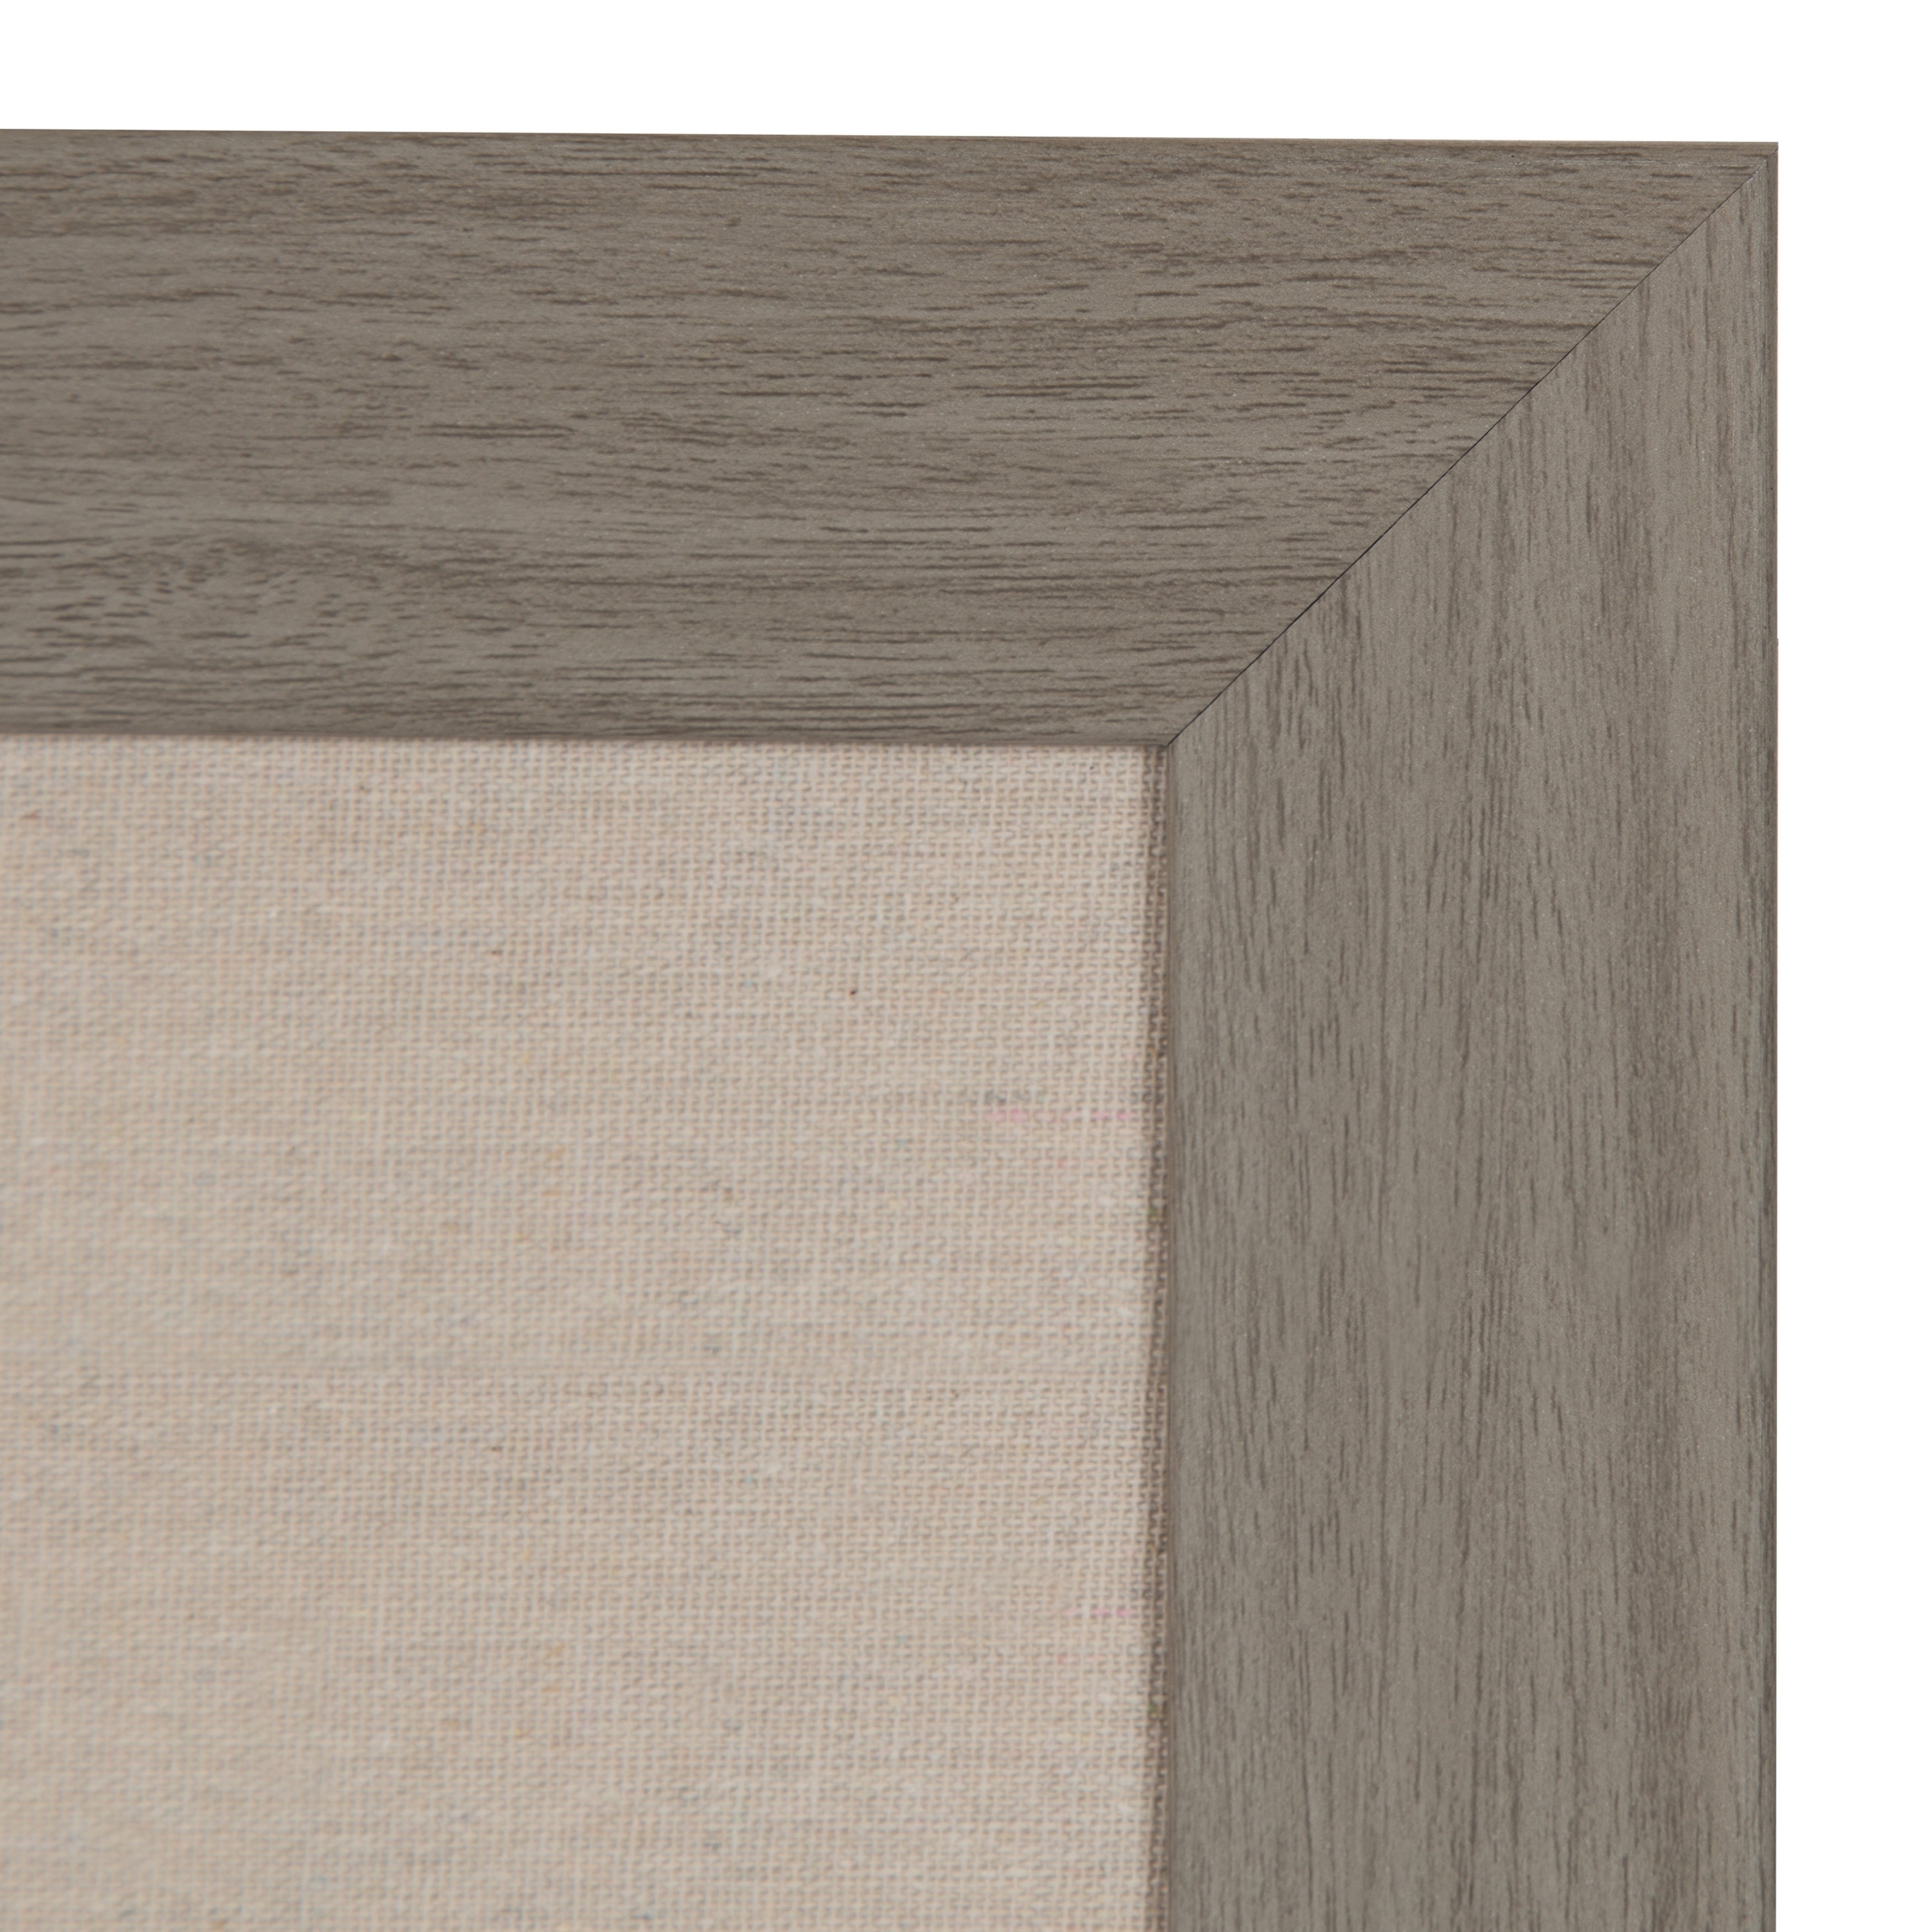 DesignOvation Beatrice Framed Linen Fabric Pinboard Rustic Brown (18x27)(As  Is Item) Bed Bath  Beyond 24148107